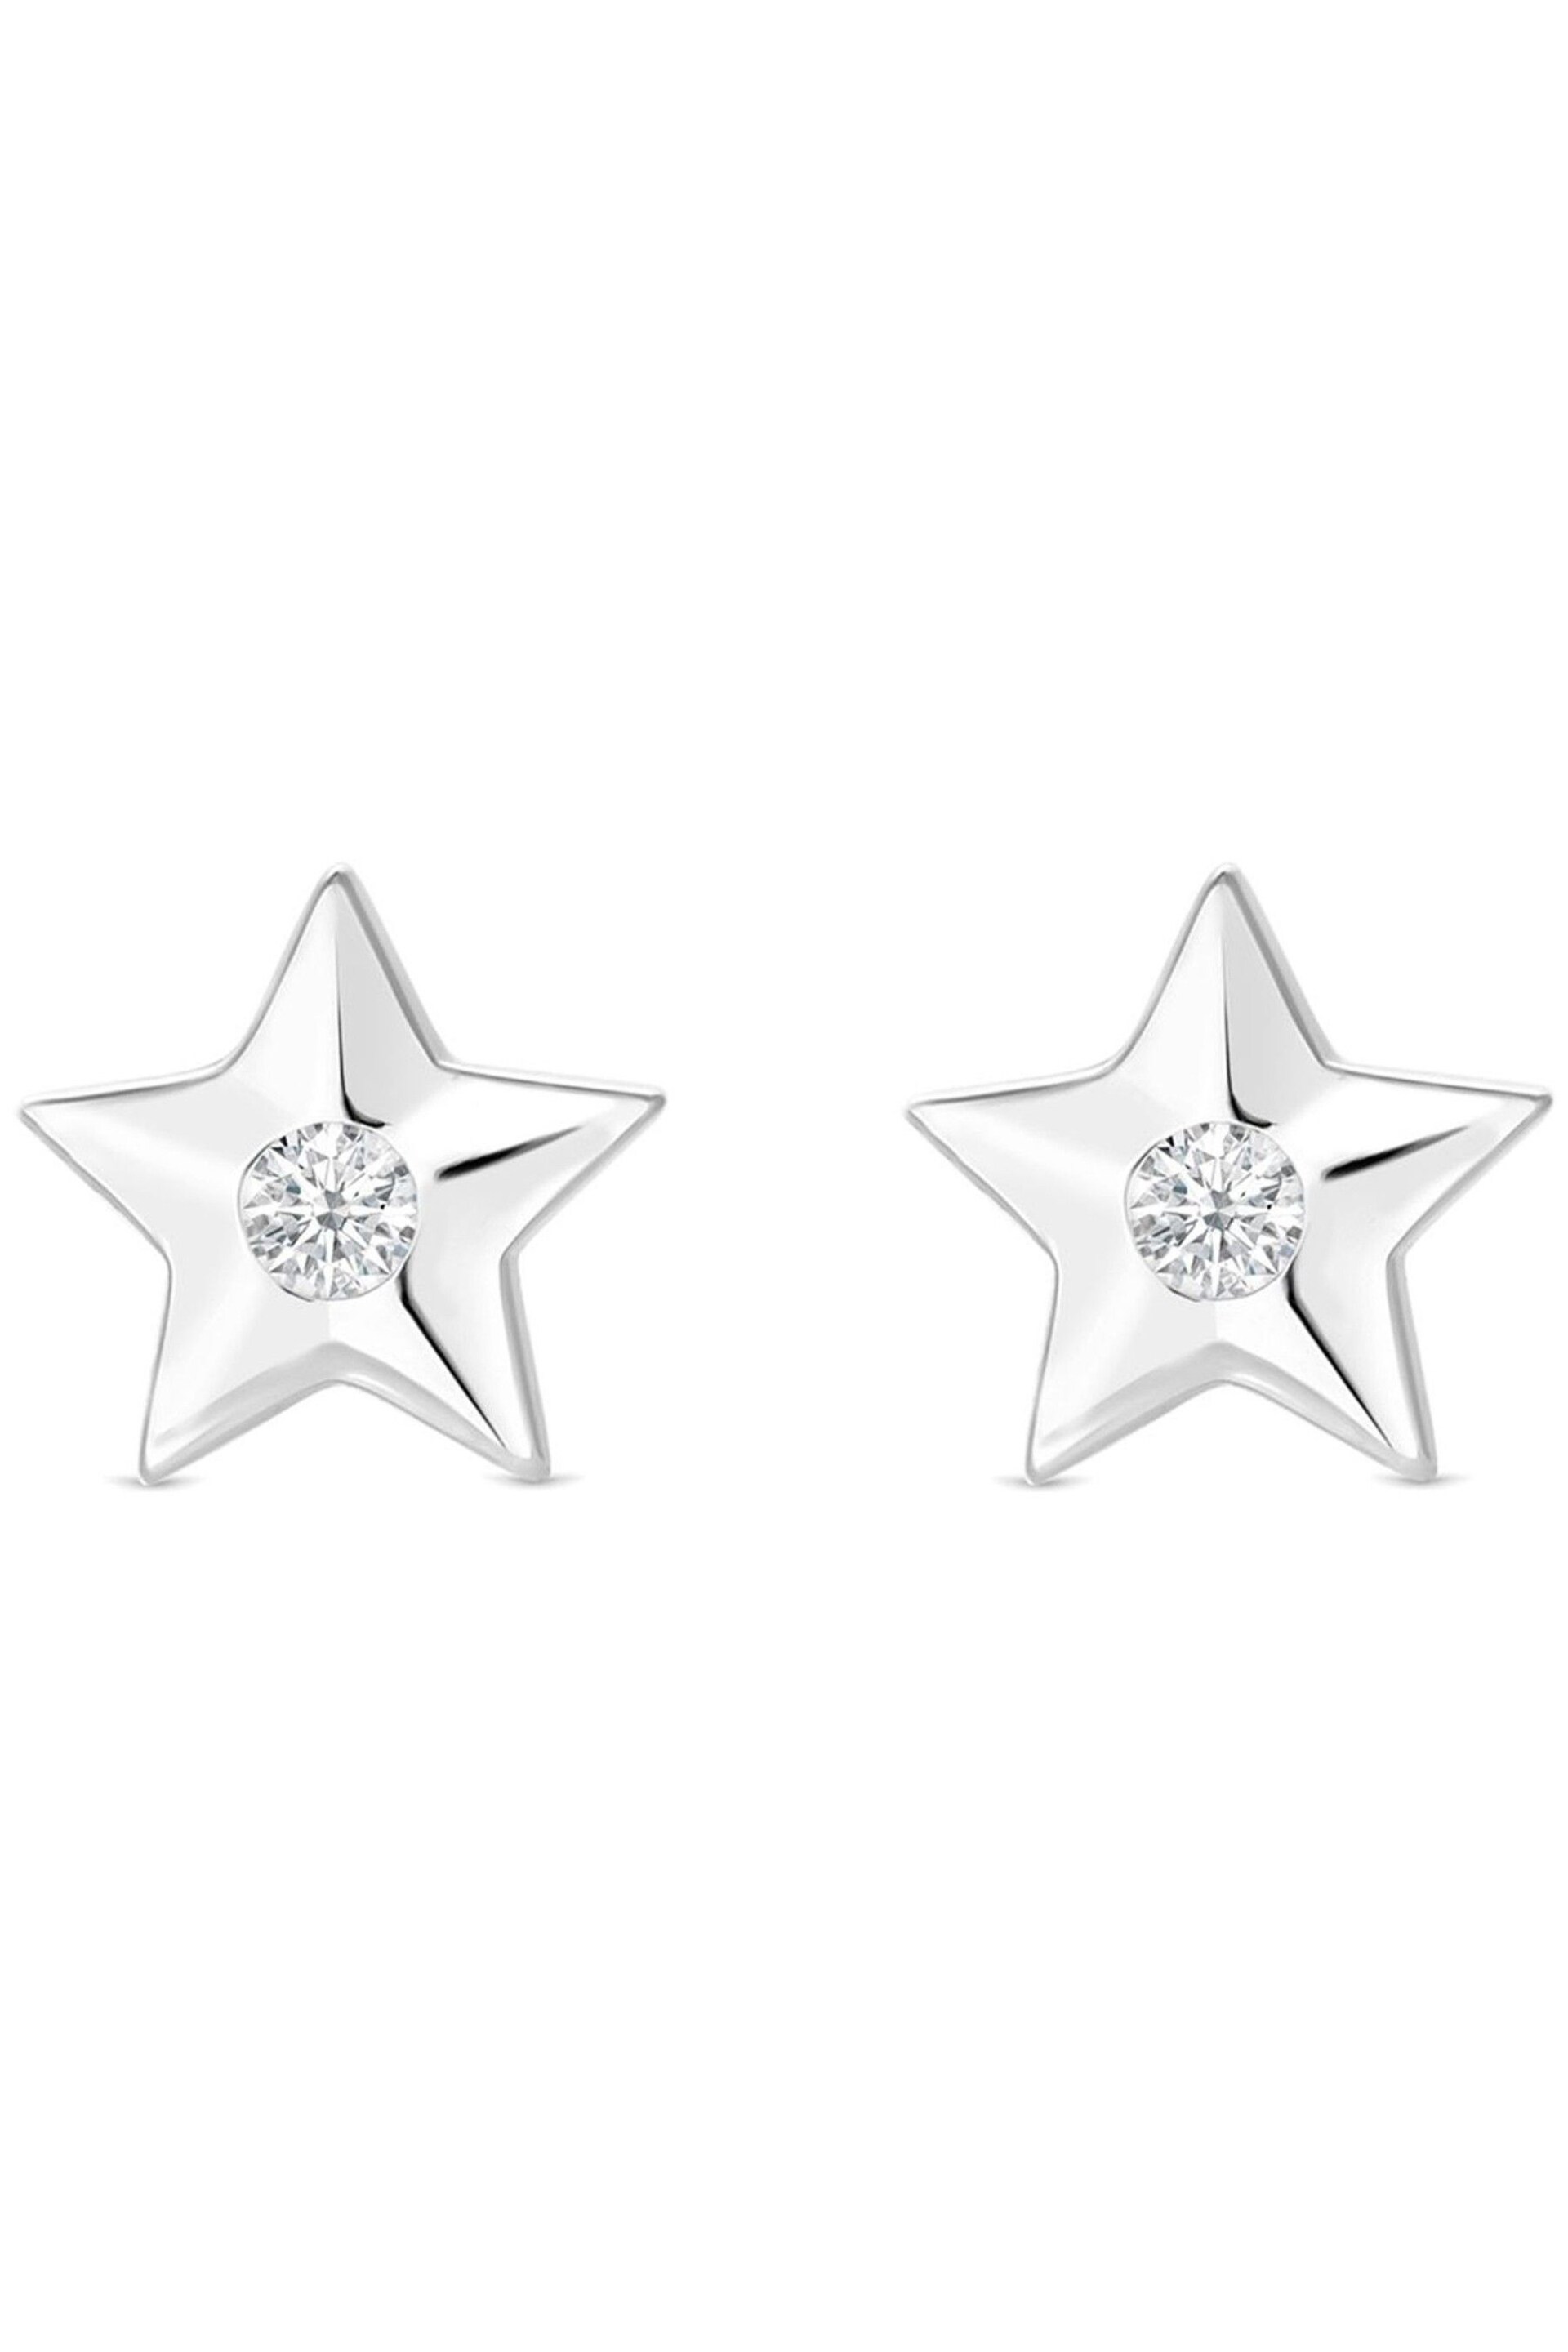 Simply Silver Sterling Silver Mini Star Stud Earrings - Image 1 of 3